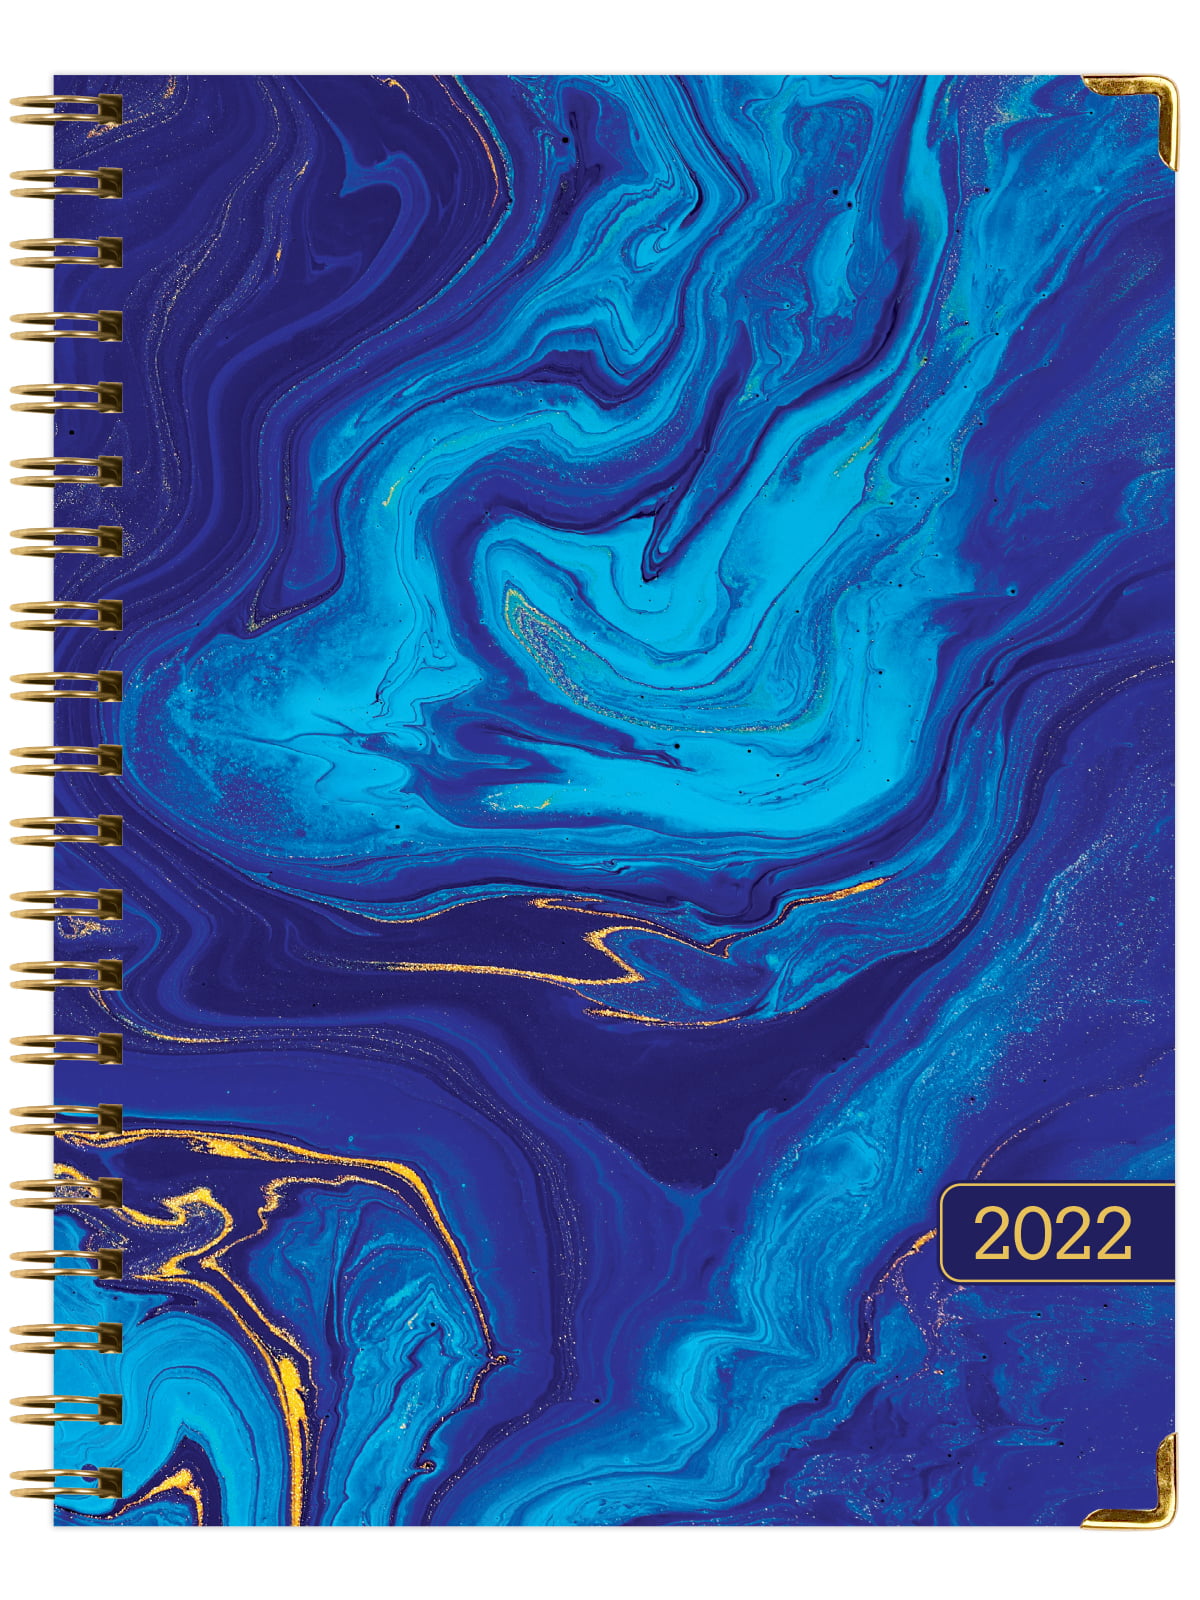 HARDCOVER 2022 Planner: Bookmark Rainbow Watercolors 5.5x8 Daily Weekly Monthly Planner Yearly Agenda November 2021 Through December 2022 Pocket Folder and Sticky Note Set 